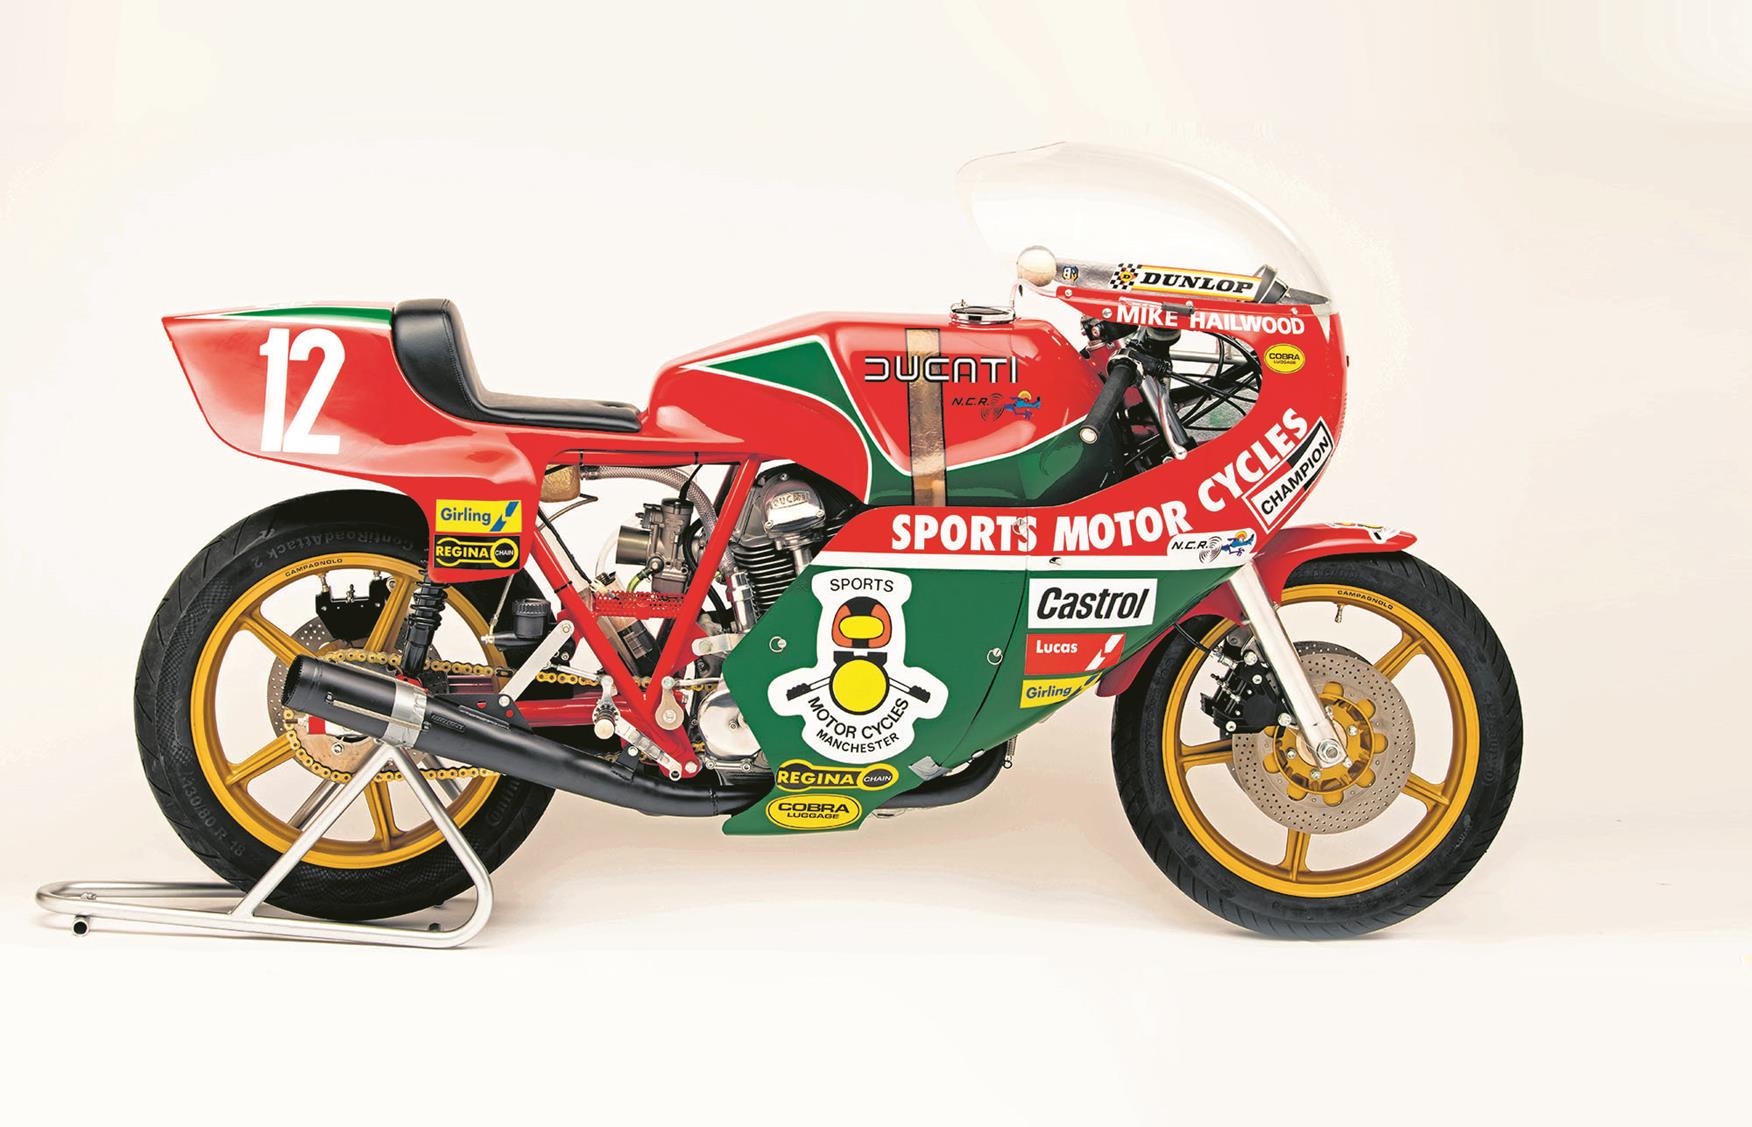 Ducati give blessing for 1978 Hailwood replicas | MCN